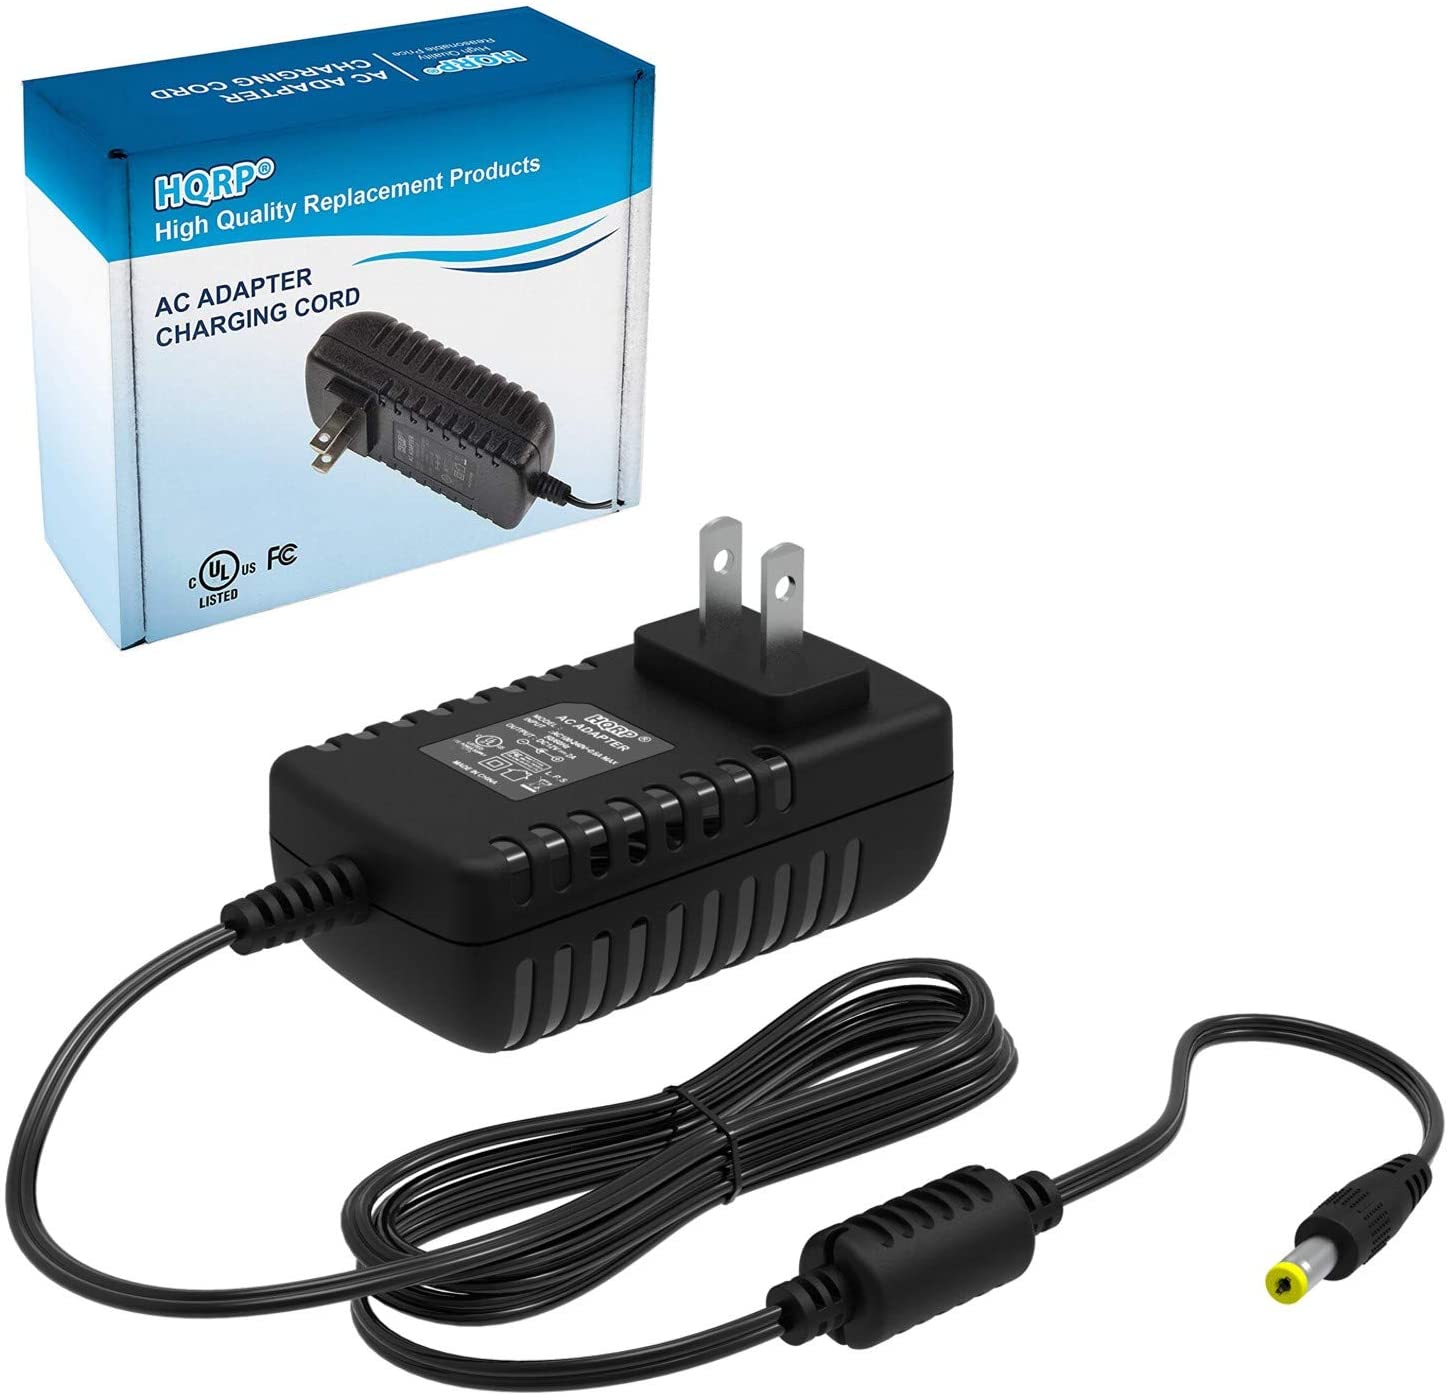 HQRP AC Adapter / Power Supply compatible with Yamaha YPG-225 / YPG225 / YPG-235 / YPG235 Keyboards Replacement